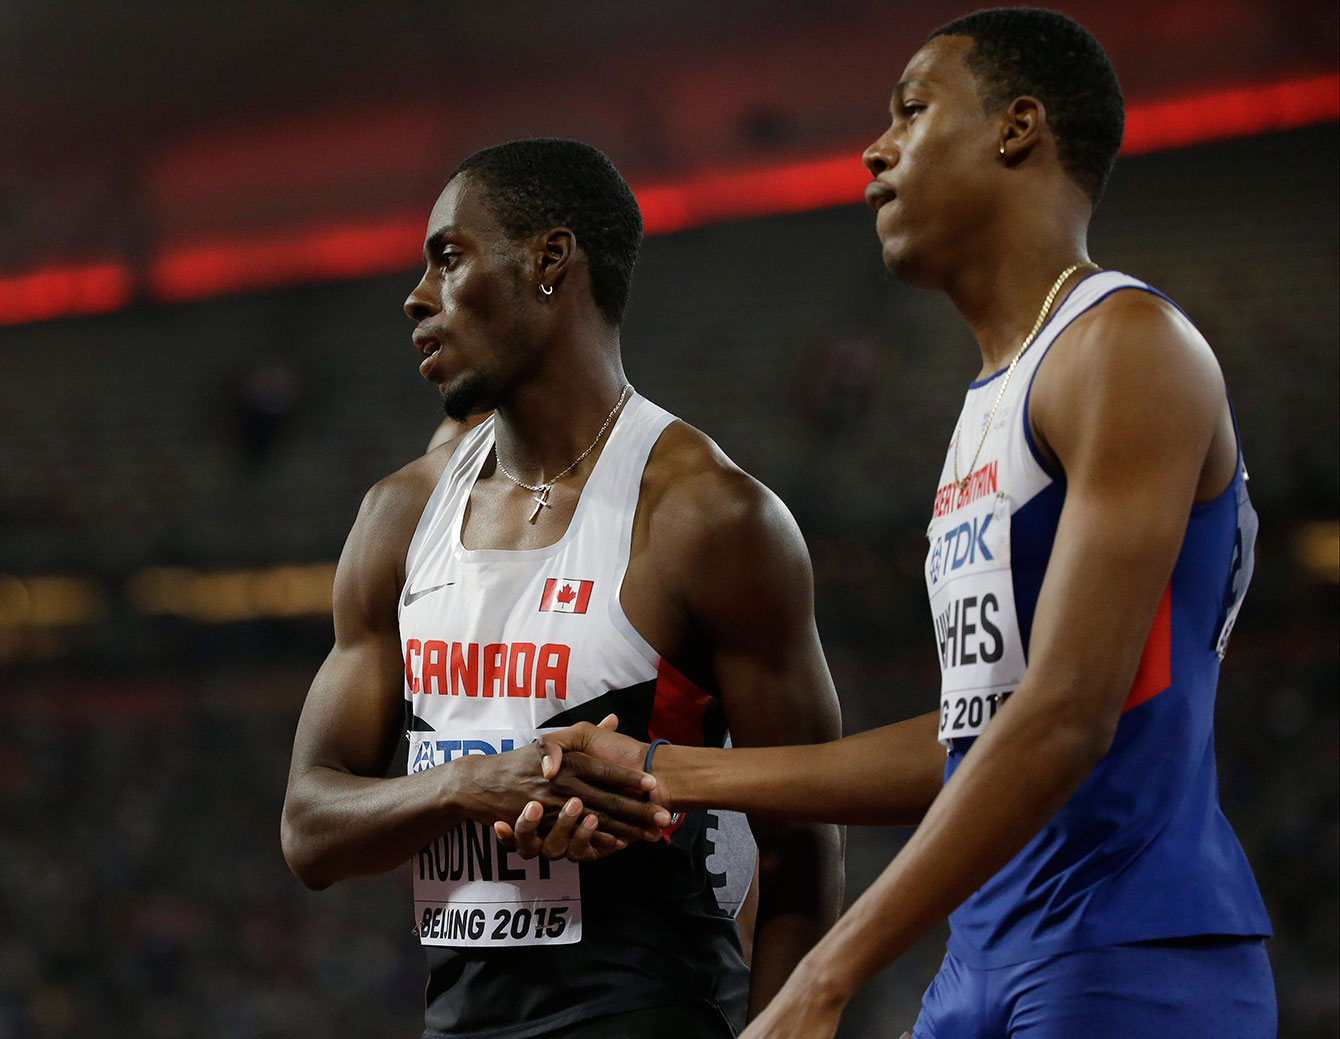 Brendon Rodney (left) with Zharnel Hughes of Great Britain after their 200m heat on August 25, 2015 at the IAAF World Championships in Athletics in Beijing, China. 